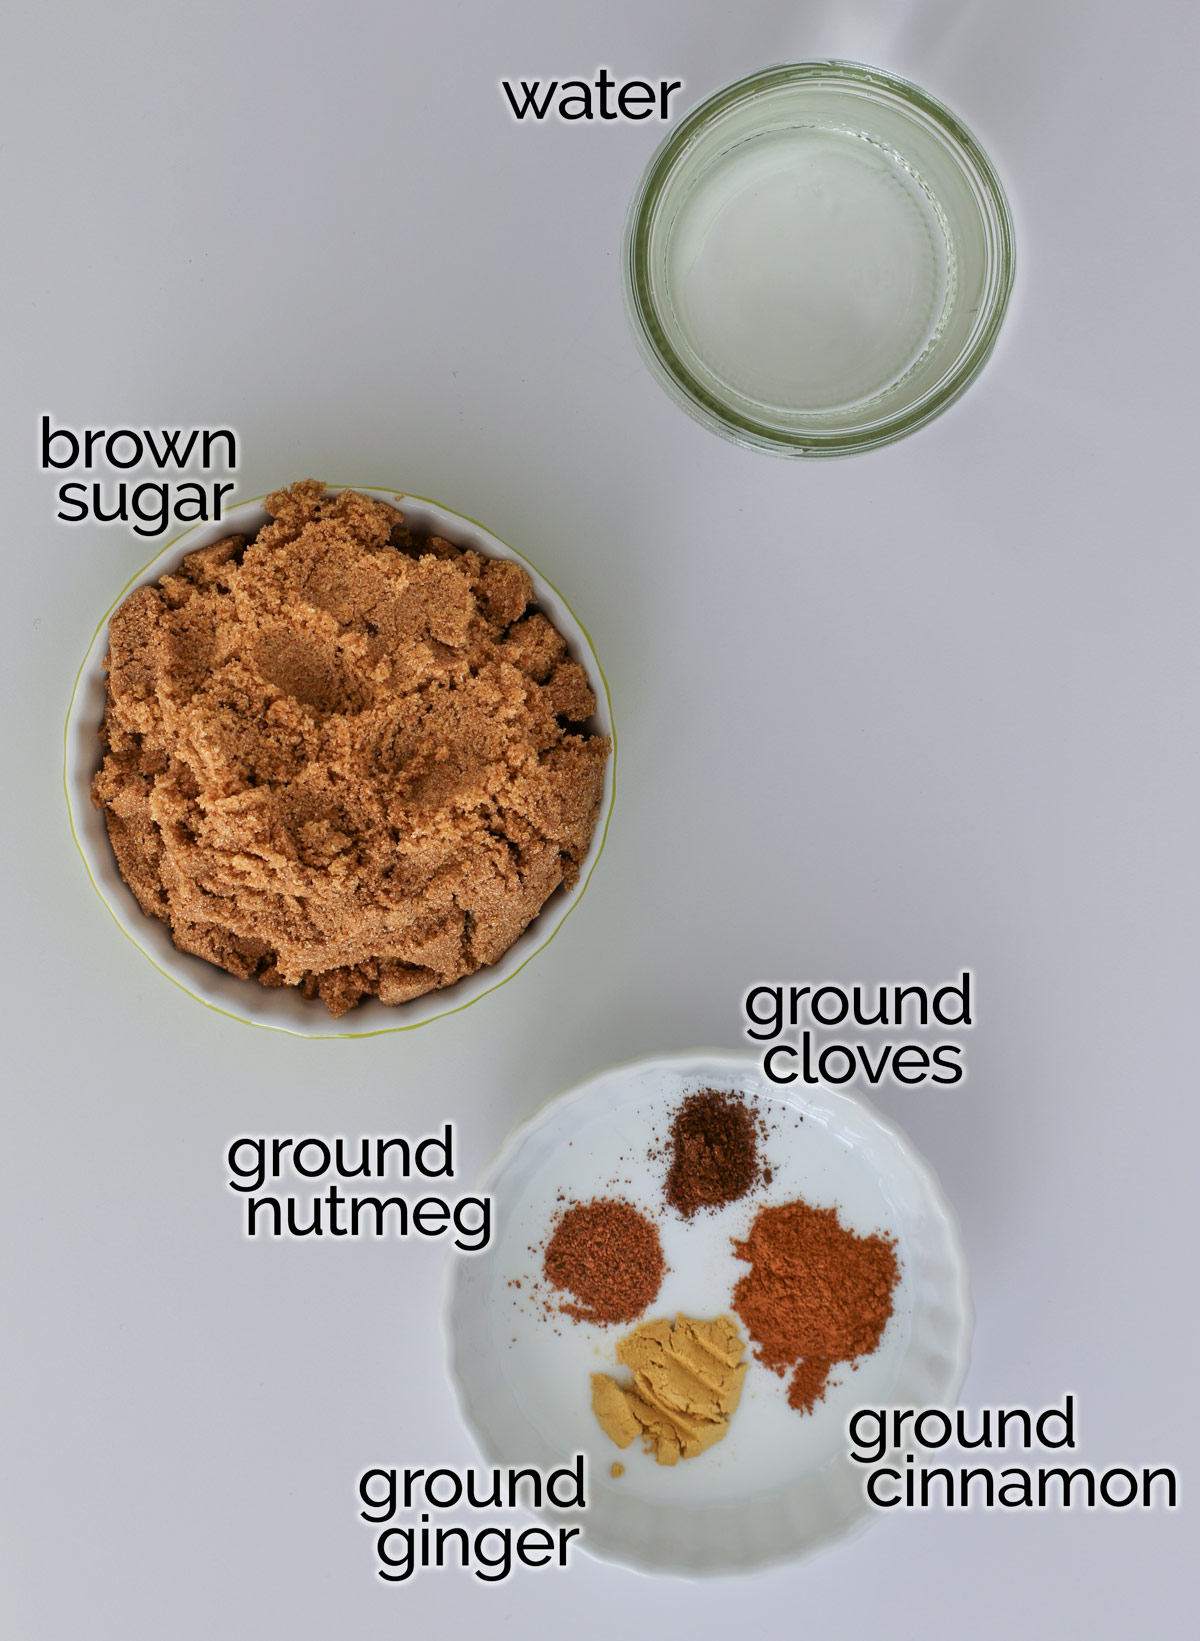 ingredients to make gingerbread syrup.